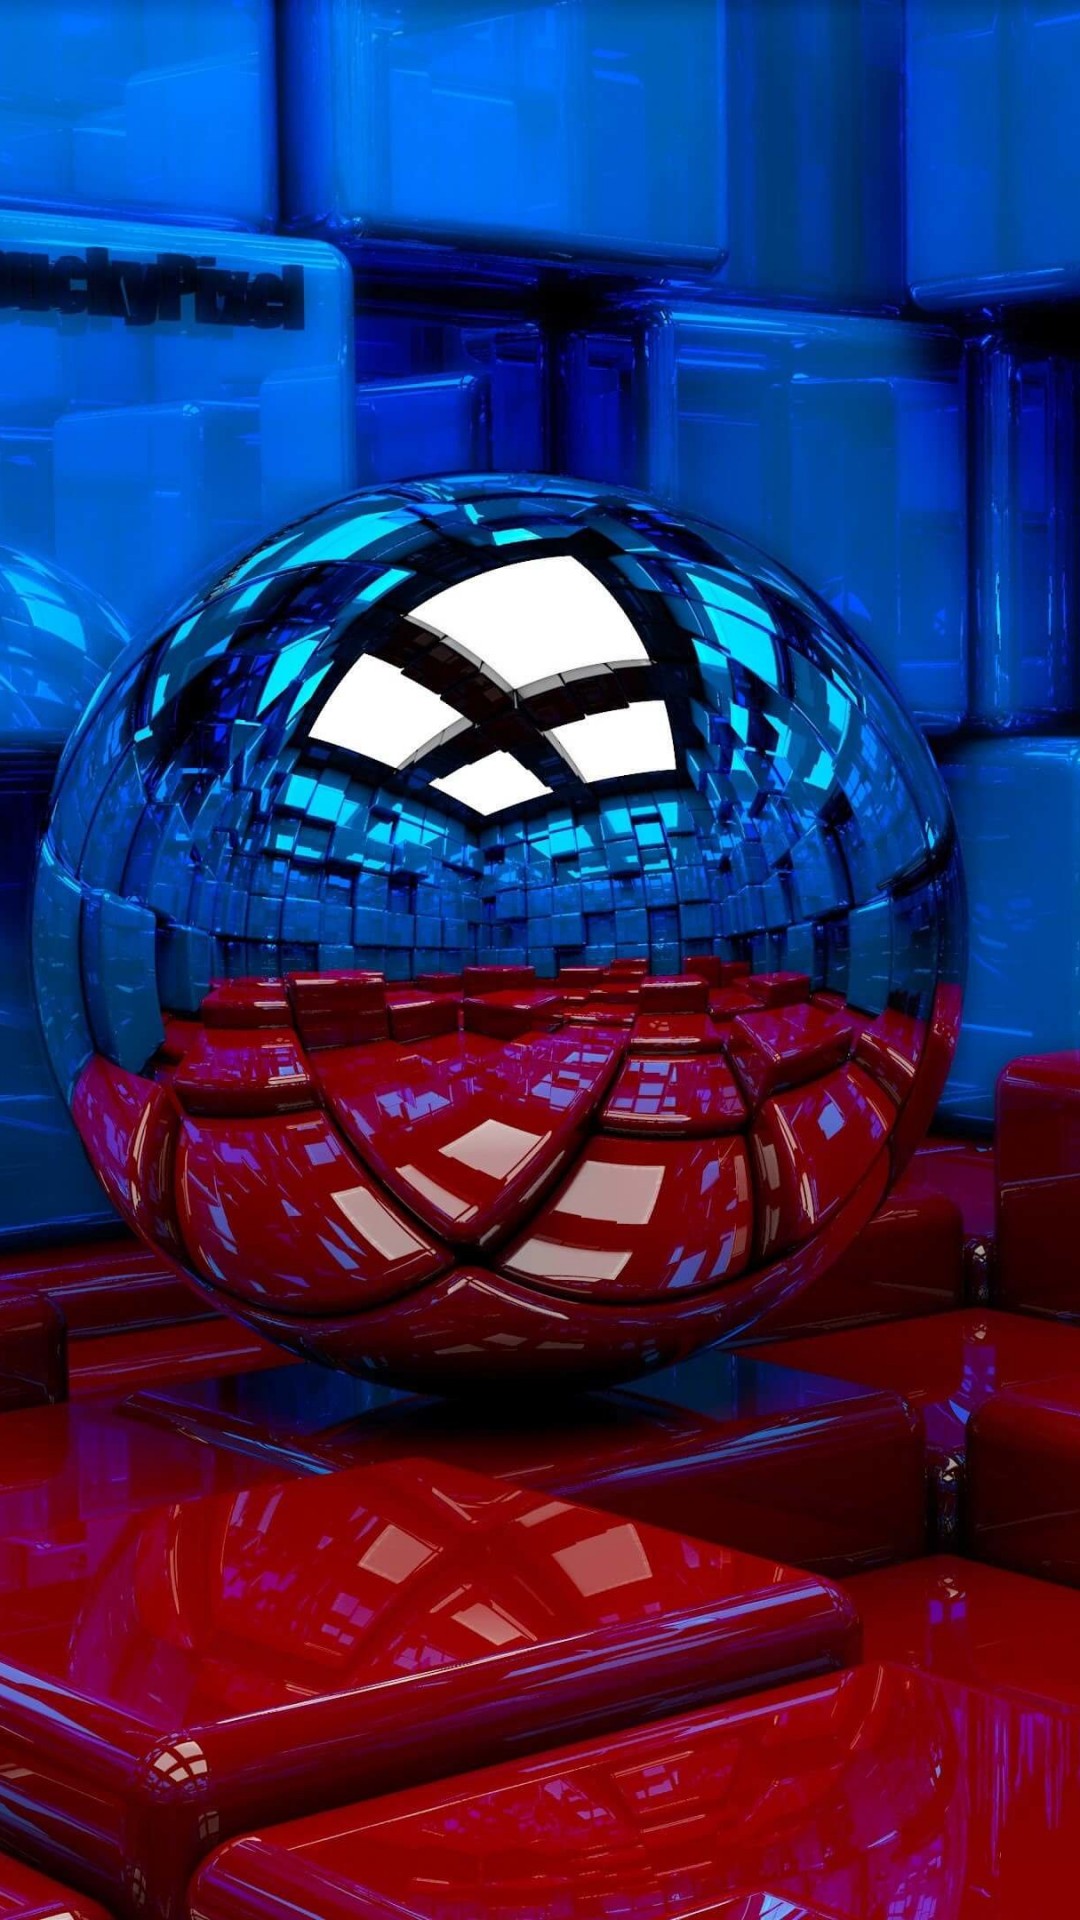 Metallic Sphere Reflecting The Cube Room Wallpaper for SAMSUNG Galaxy S5